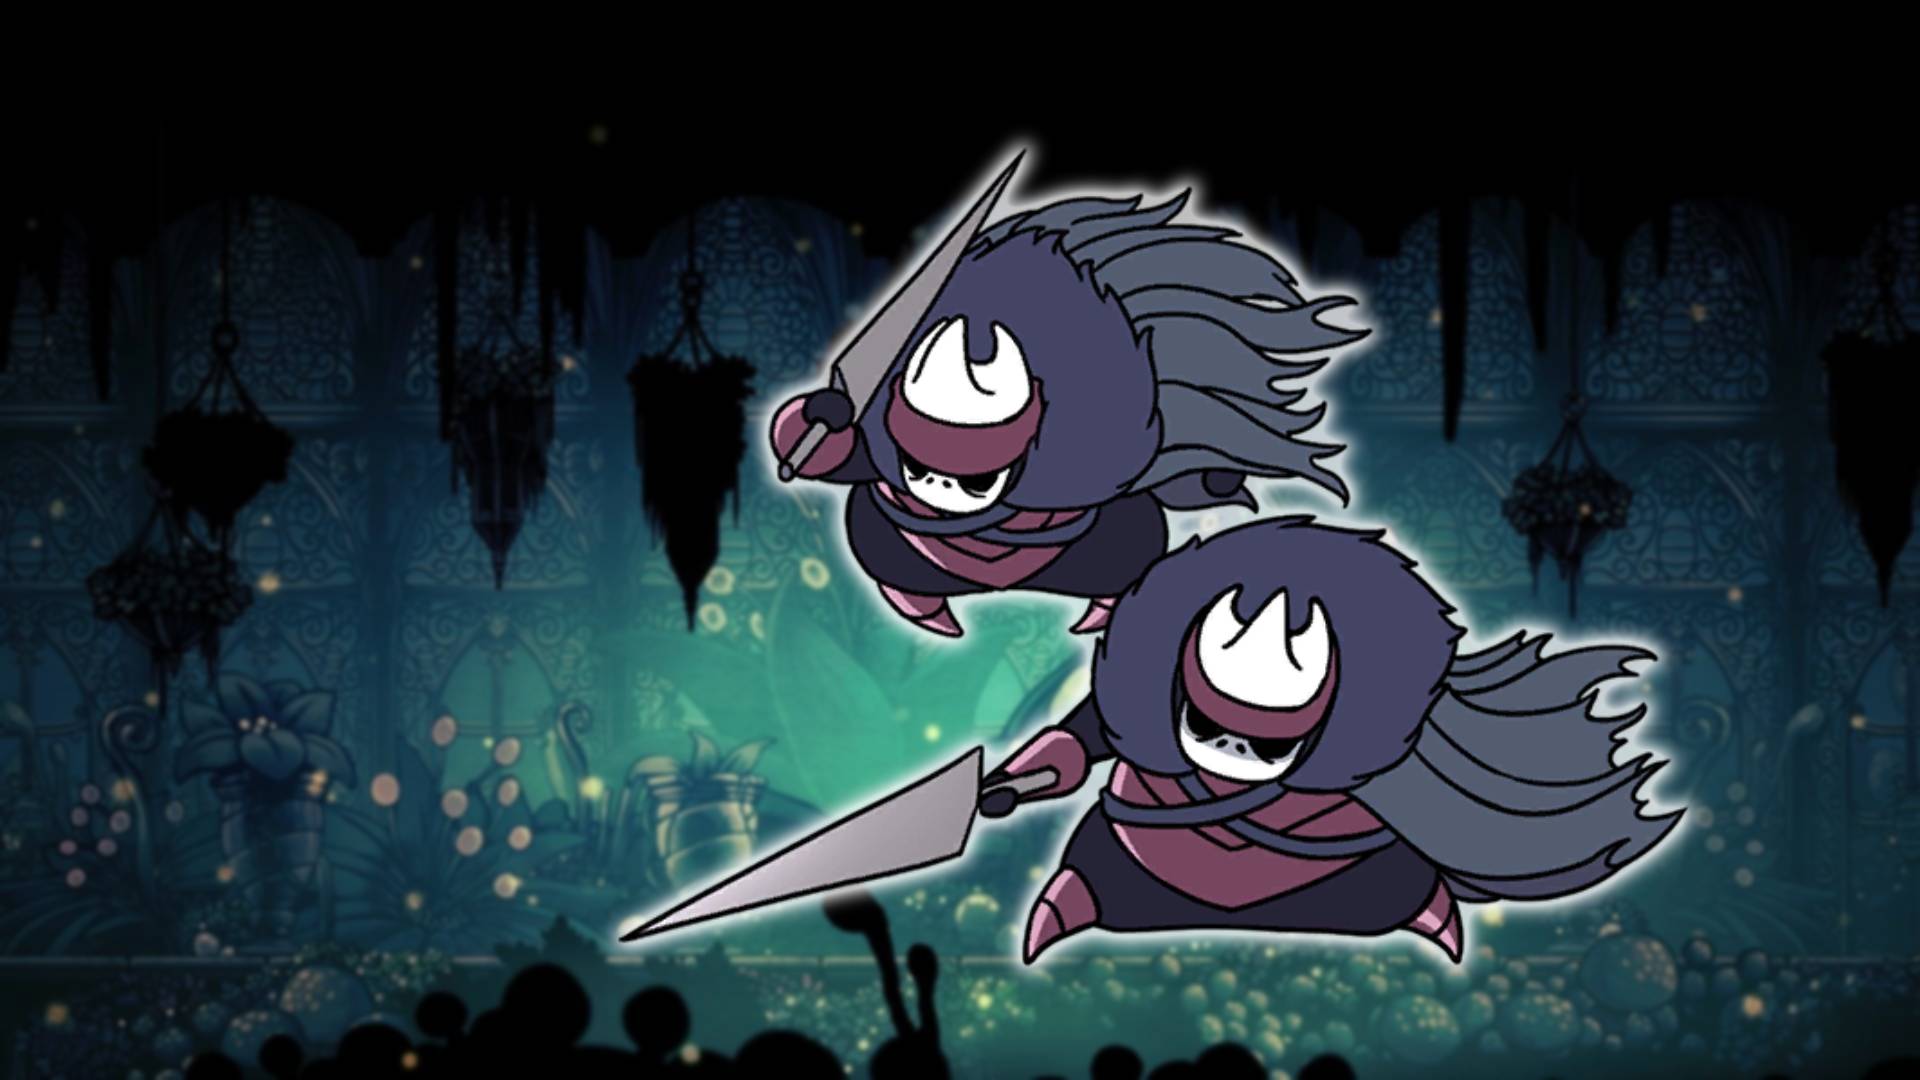 Brothers Oro & Mato - the Hollow Knight boss, is visible against a mossy green background area from Hollow Knight 